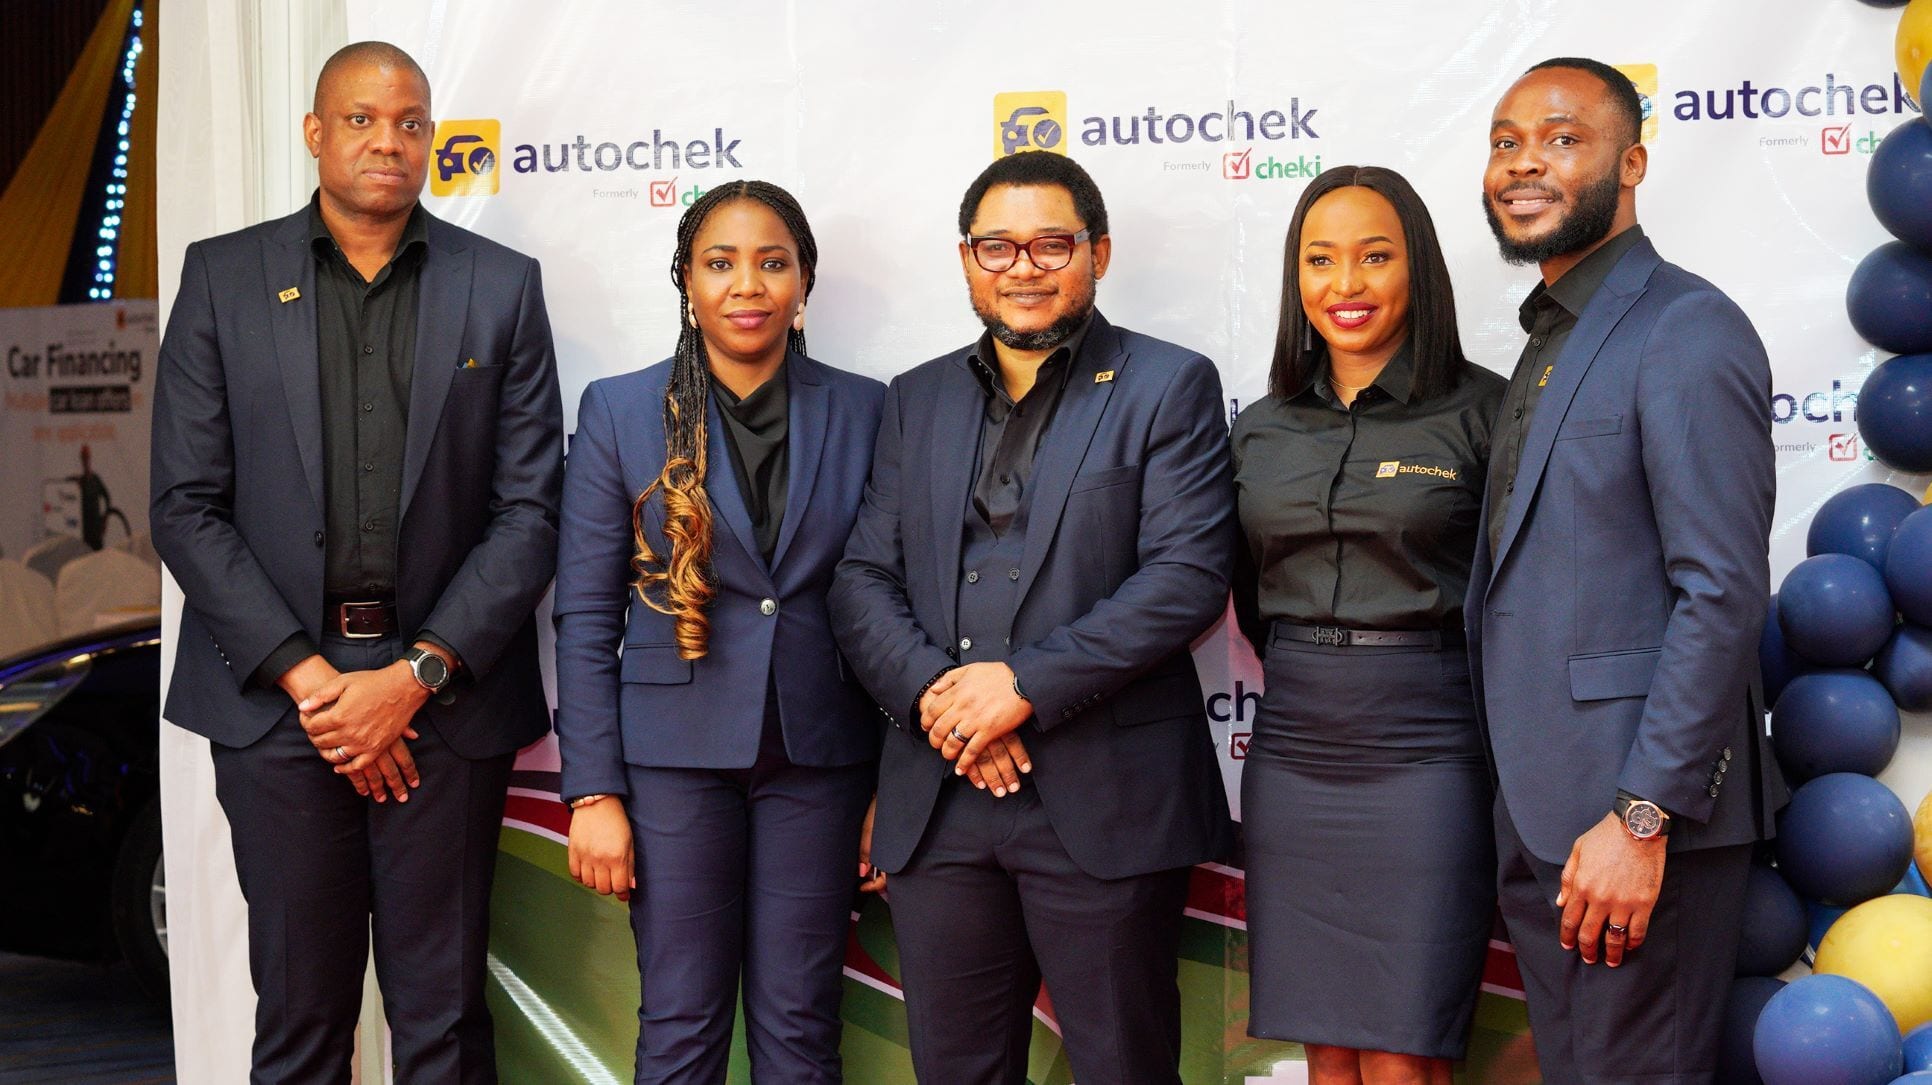 AutoChek officially launches after acquiring Cheki Kenya